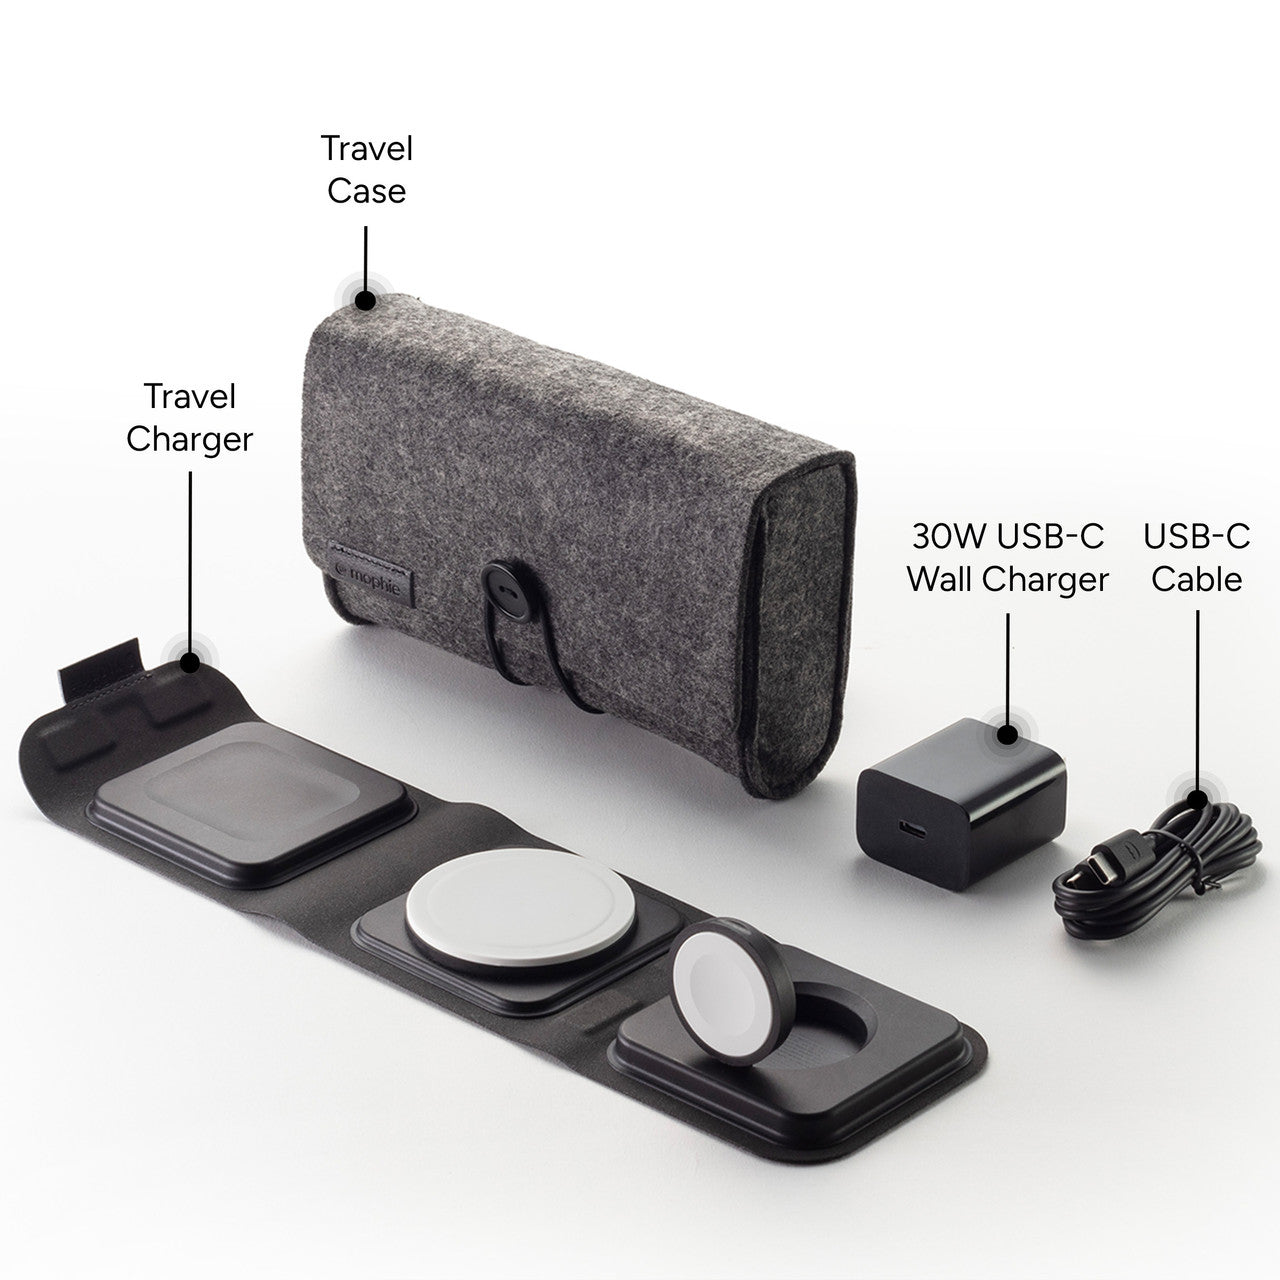 mophie 3-in-1 travel charger with MagSafe